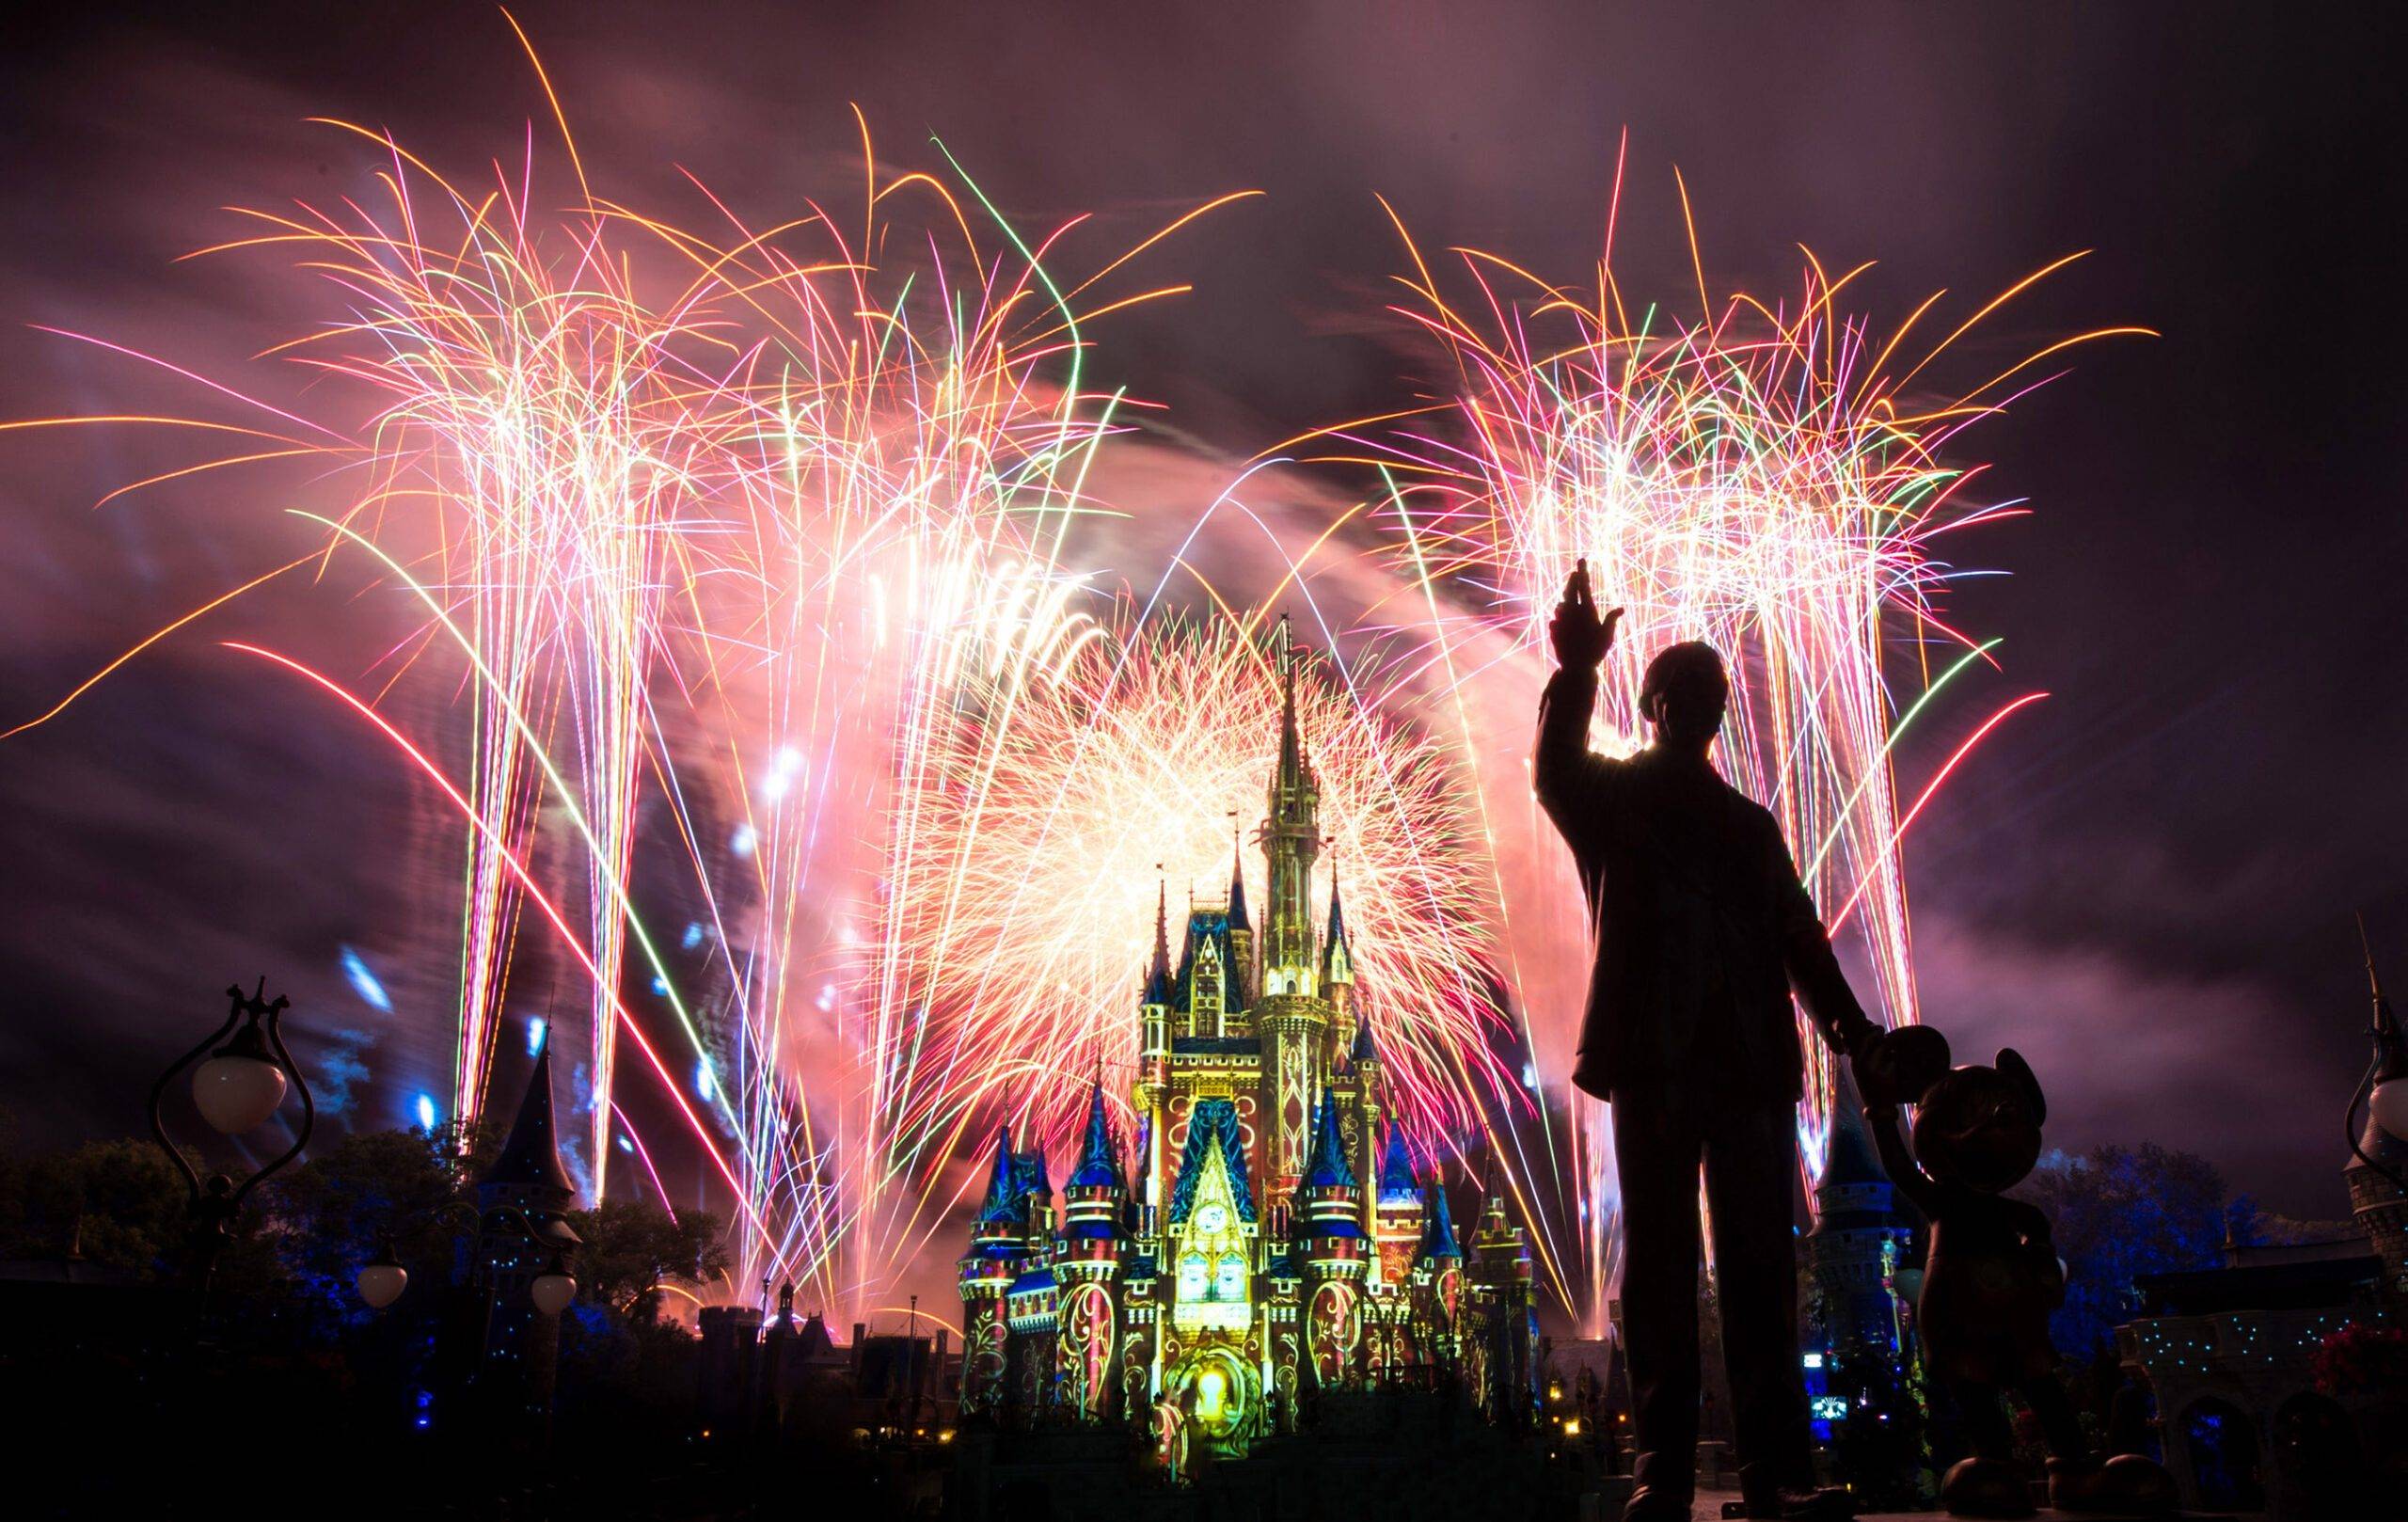 Happily Ever After will be shown on July 4 at Magic Kingdom